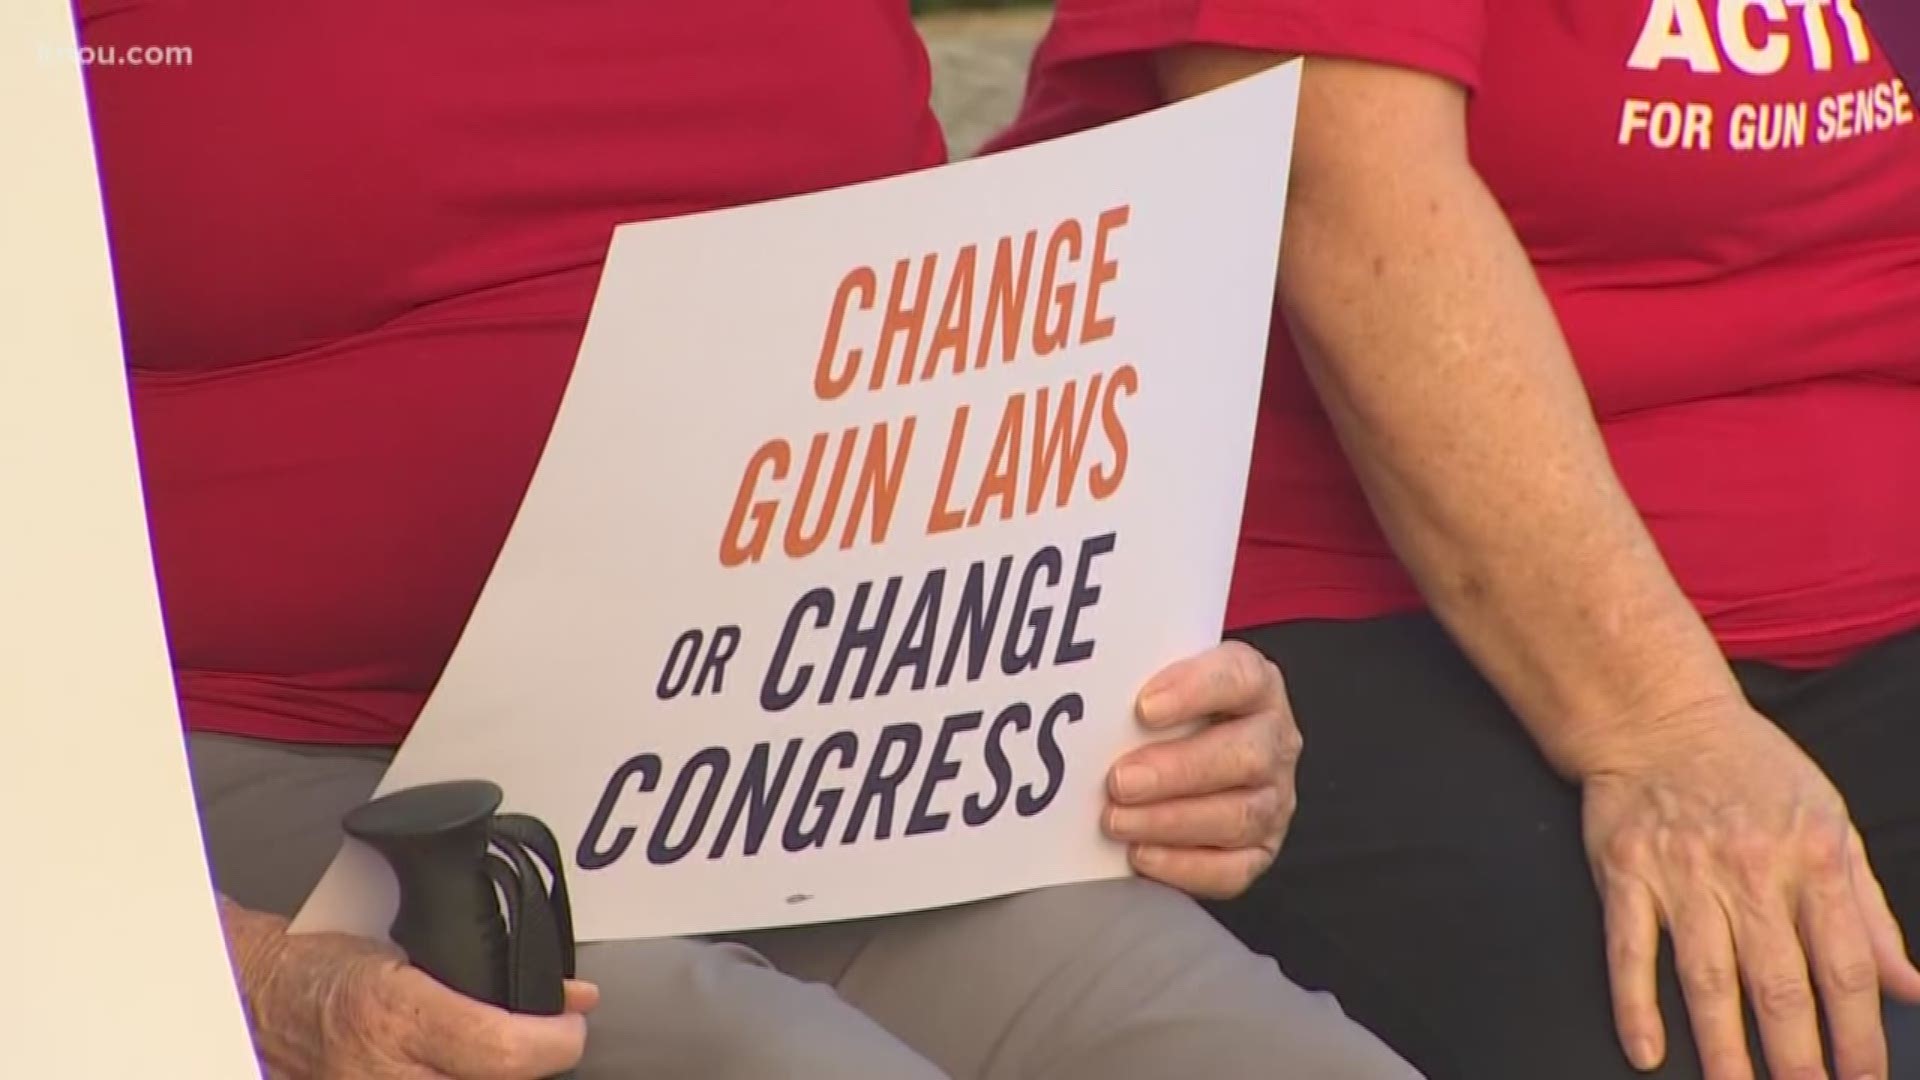 When the El Paso and Dayton mass shootings happened, Houston City Hall lit up in Orange as a call to end gun violence. On Sunday, the call was heard again from the steps of Houston City Hall, as the gun control group "Moms Demand Action" hosted a rally.